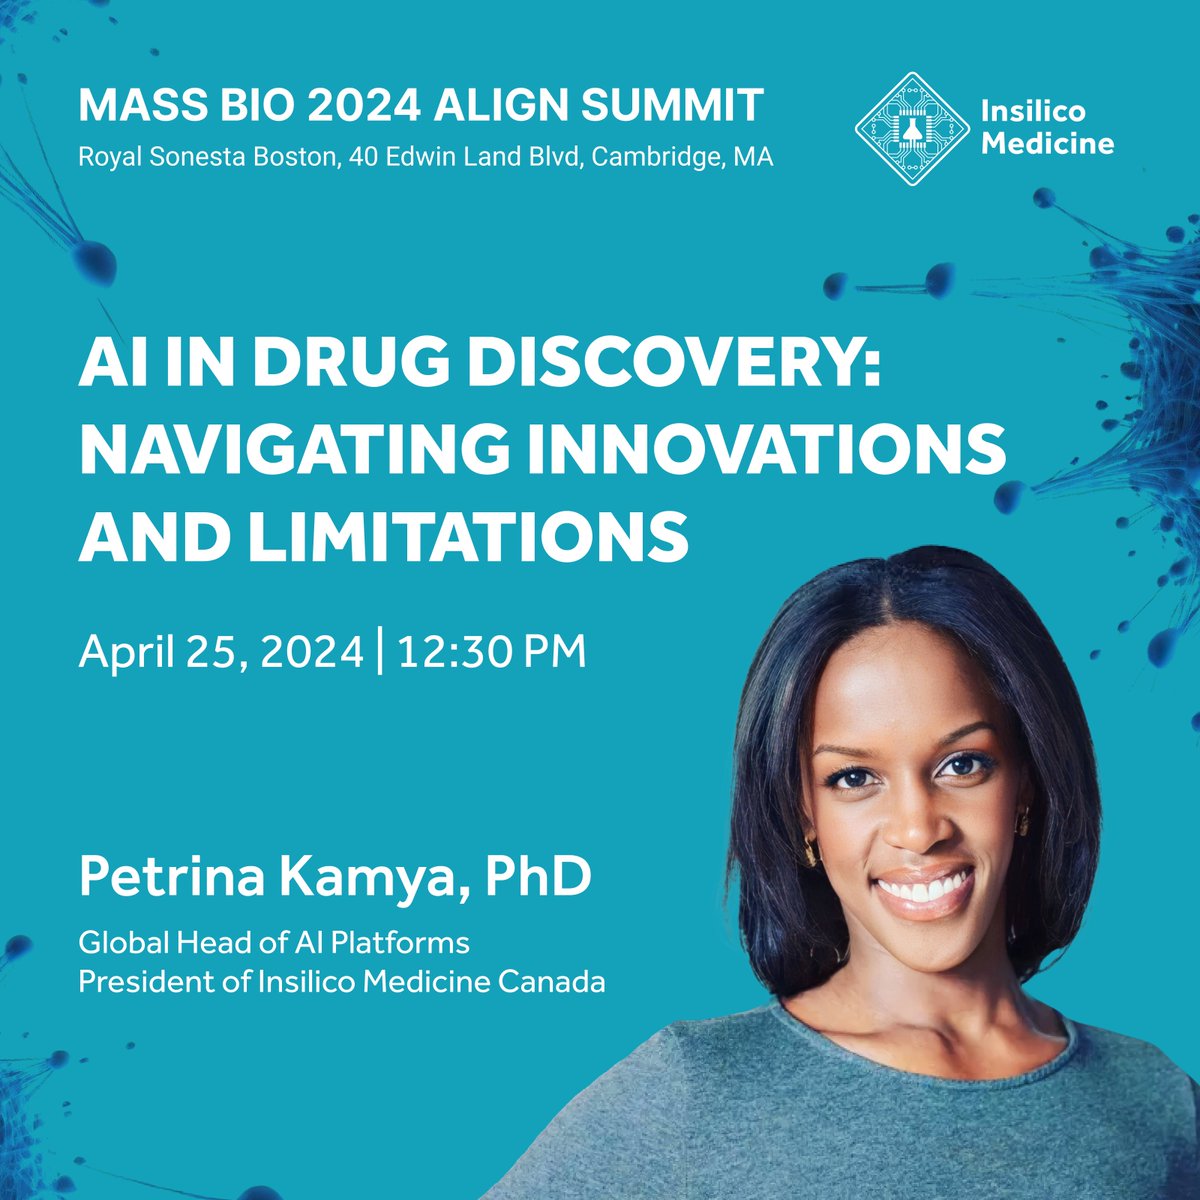 Are you at the sold out @MassBio Align Summit? Connect with Petrina Kamya, Ph.D. Global Head of AI Platforms at Insilico who is speaking at 12:30pm ET today on 'AI in Drug Discovery' w/ panelists from @EliLillyandCo, @DanaherCorp, @Microsoft, and @Ginkgo. massbio.org/events/listing…